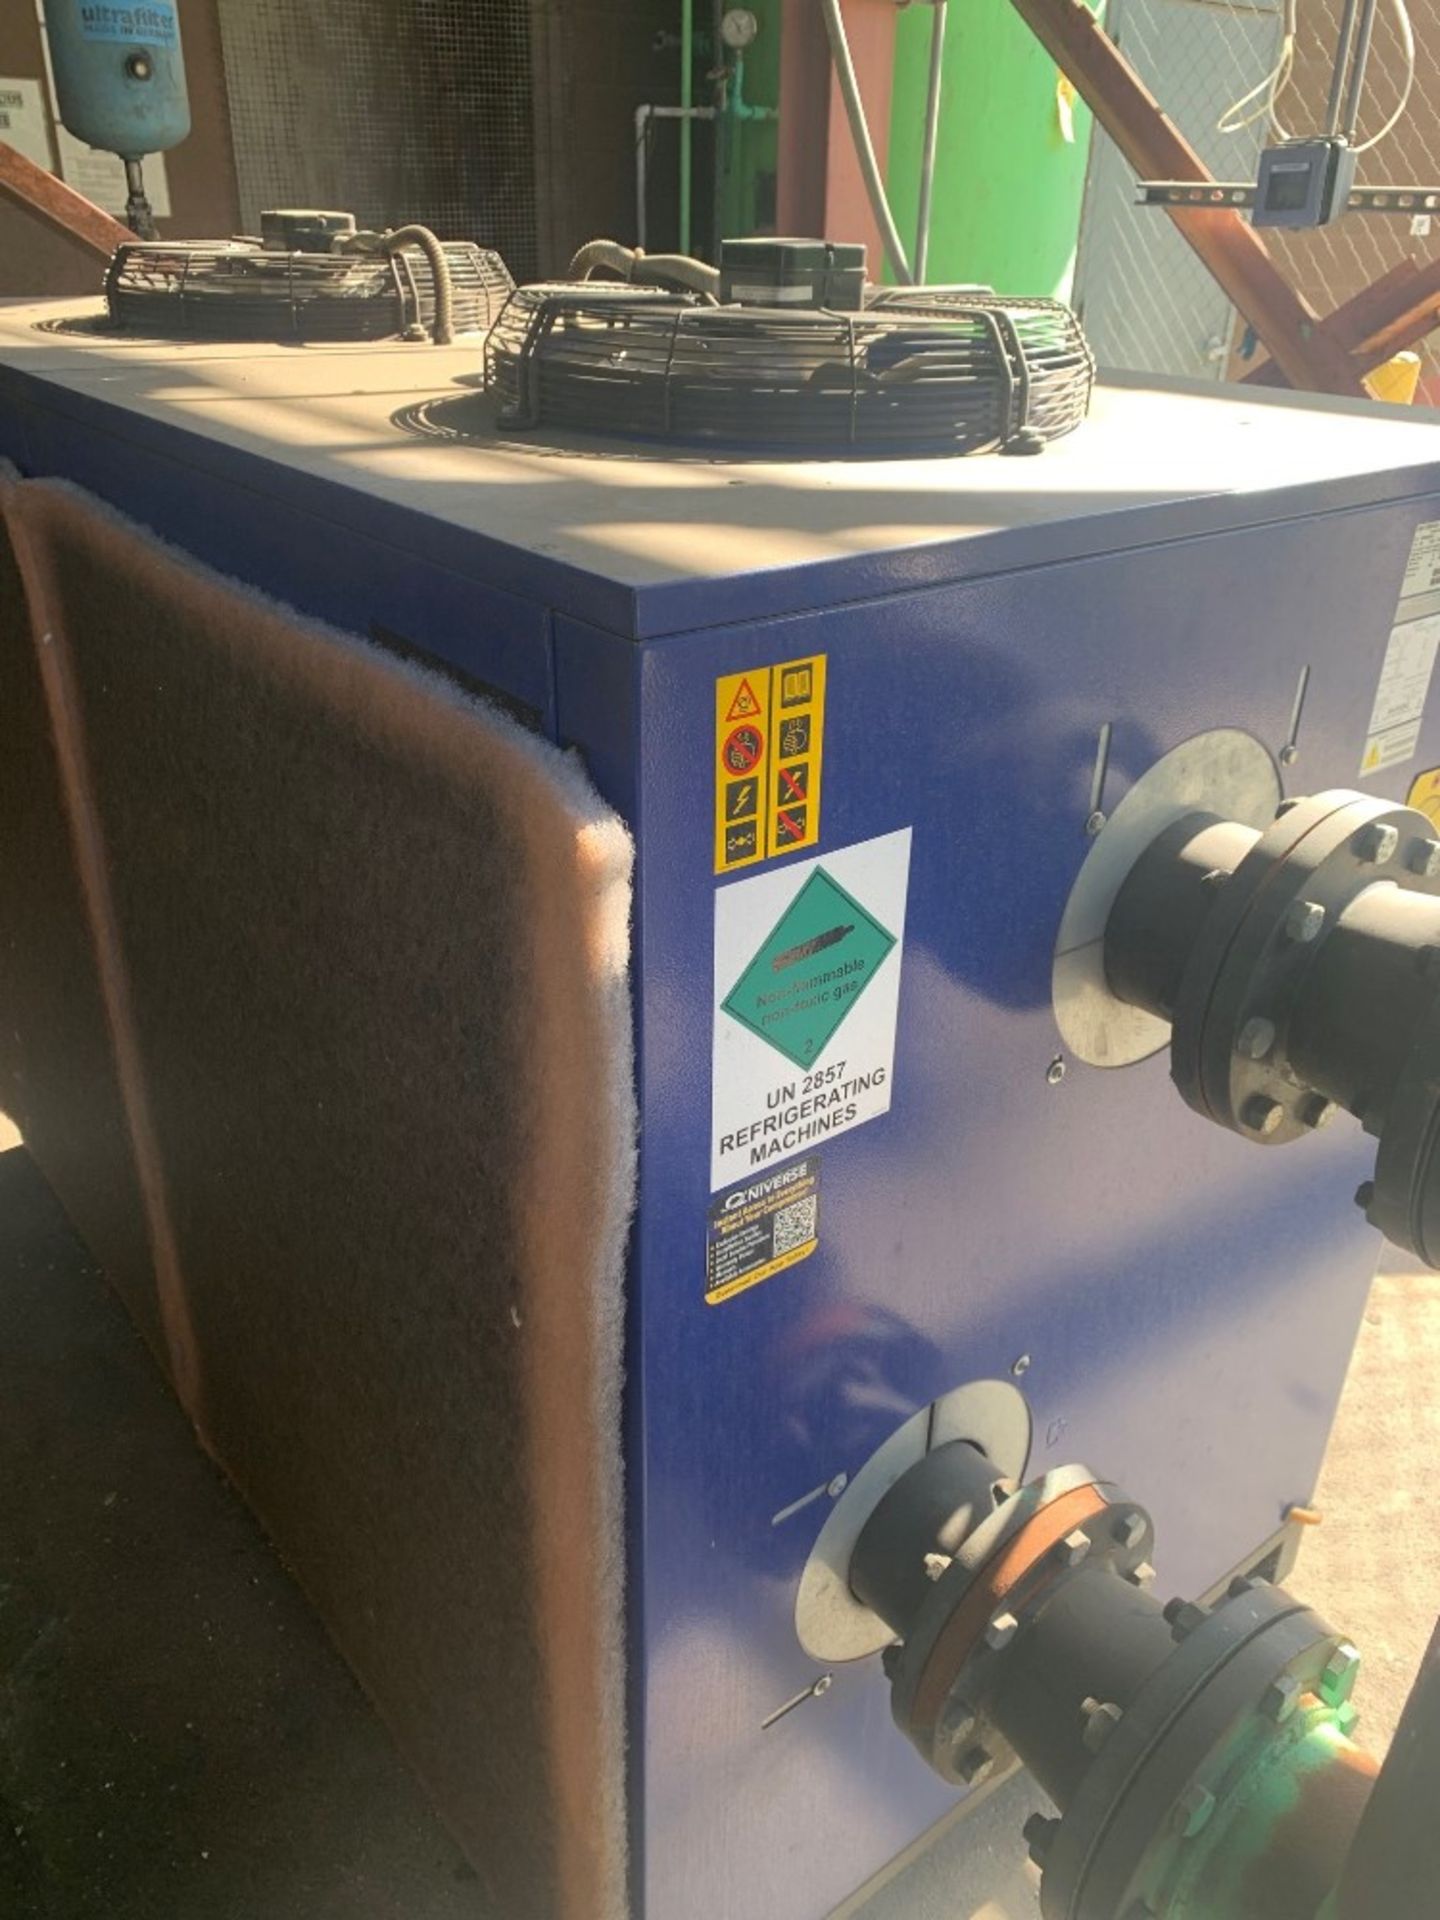 Quincy Mdl. QPMC3000 Air Dryer, Ser. #ITJ421788, Mfg. 2020: Required Loading Fee $1800.00, Rigger-